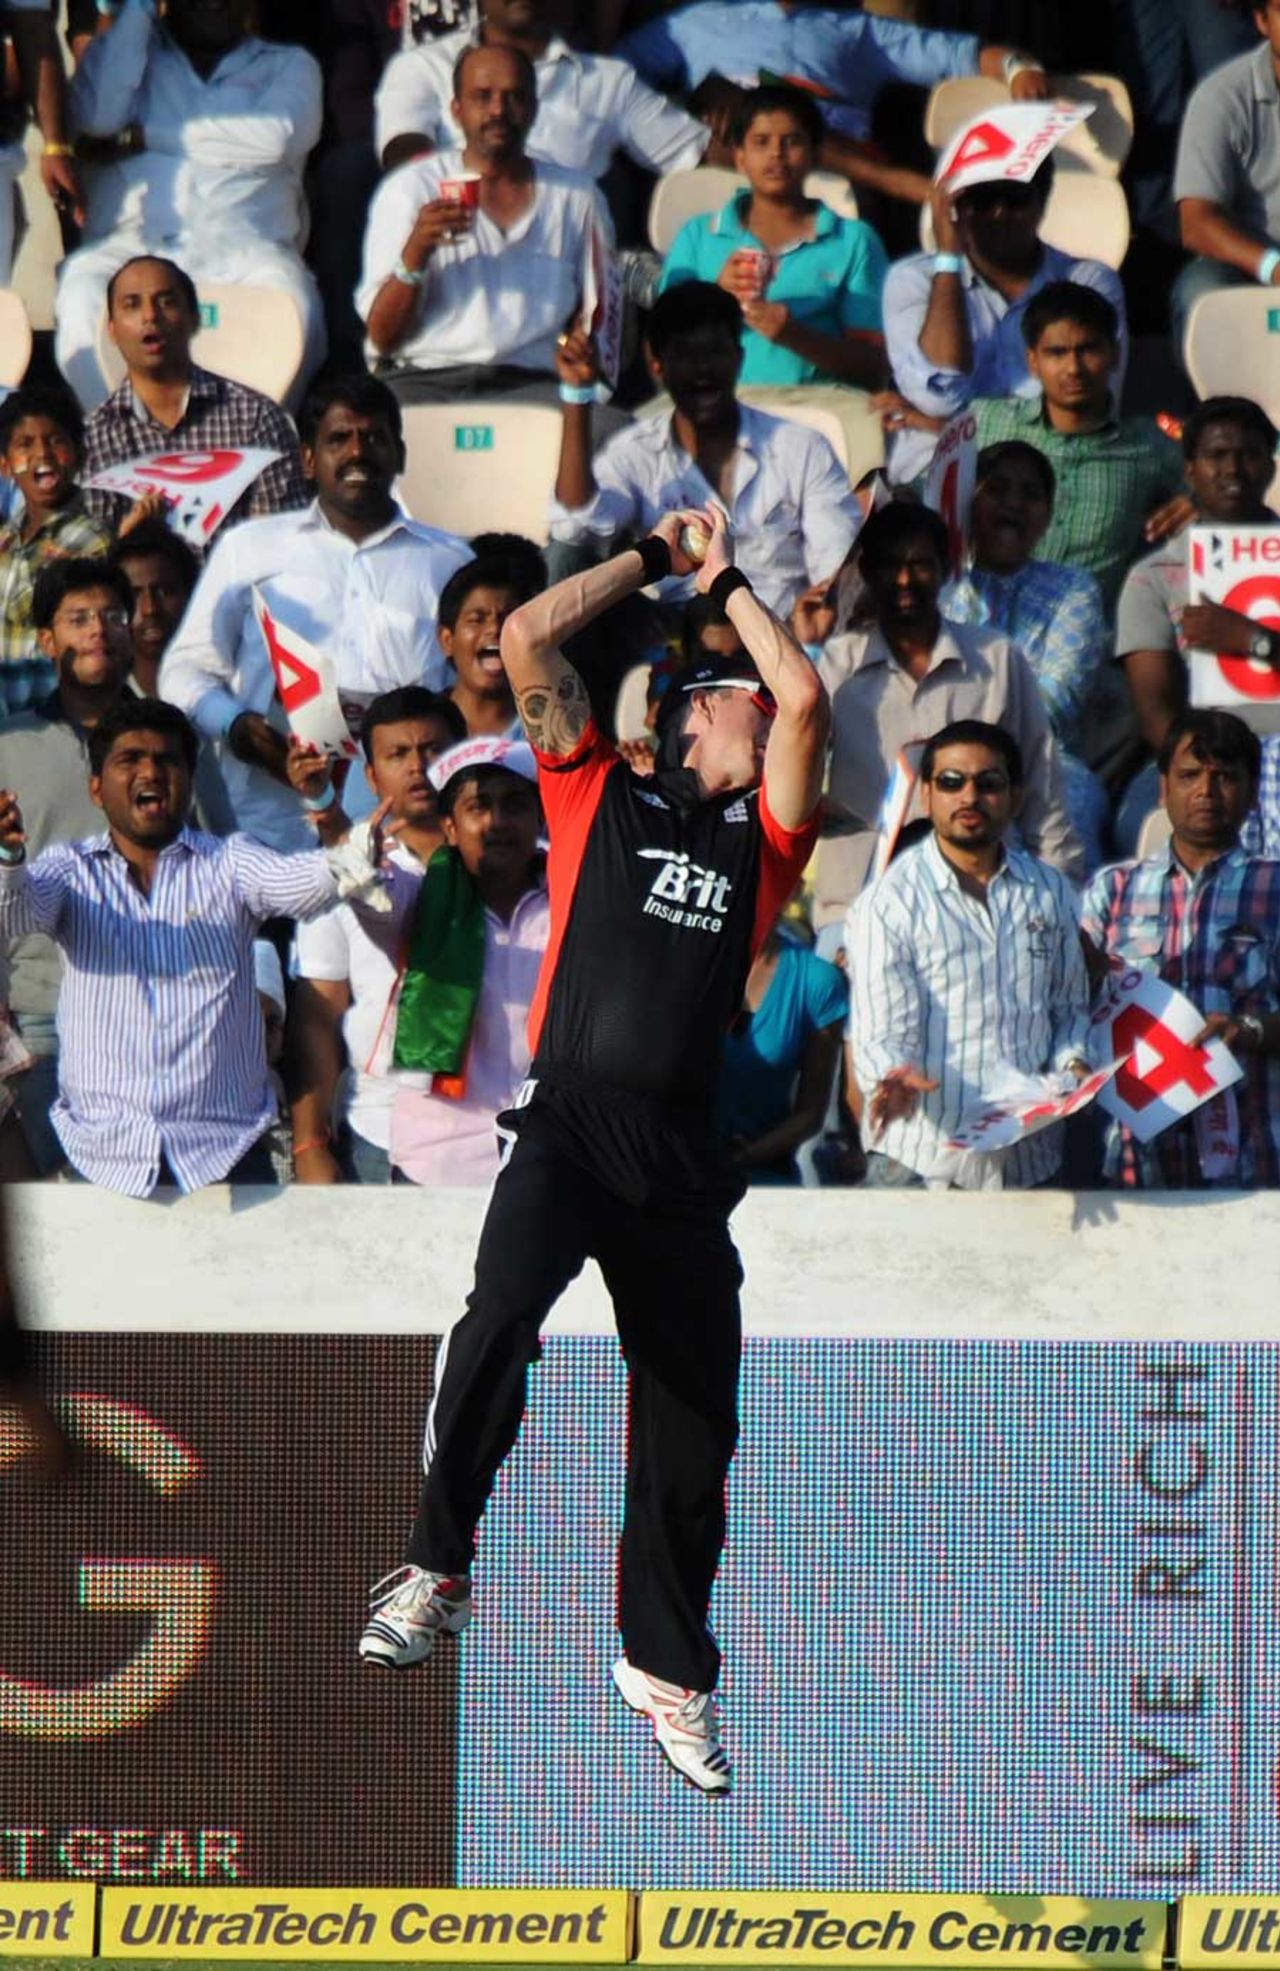 Kevin Pietersen leaps to take a well-judged catch on the boundary, India v England, 1st ODI, Hyderabad, October 14, 2011